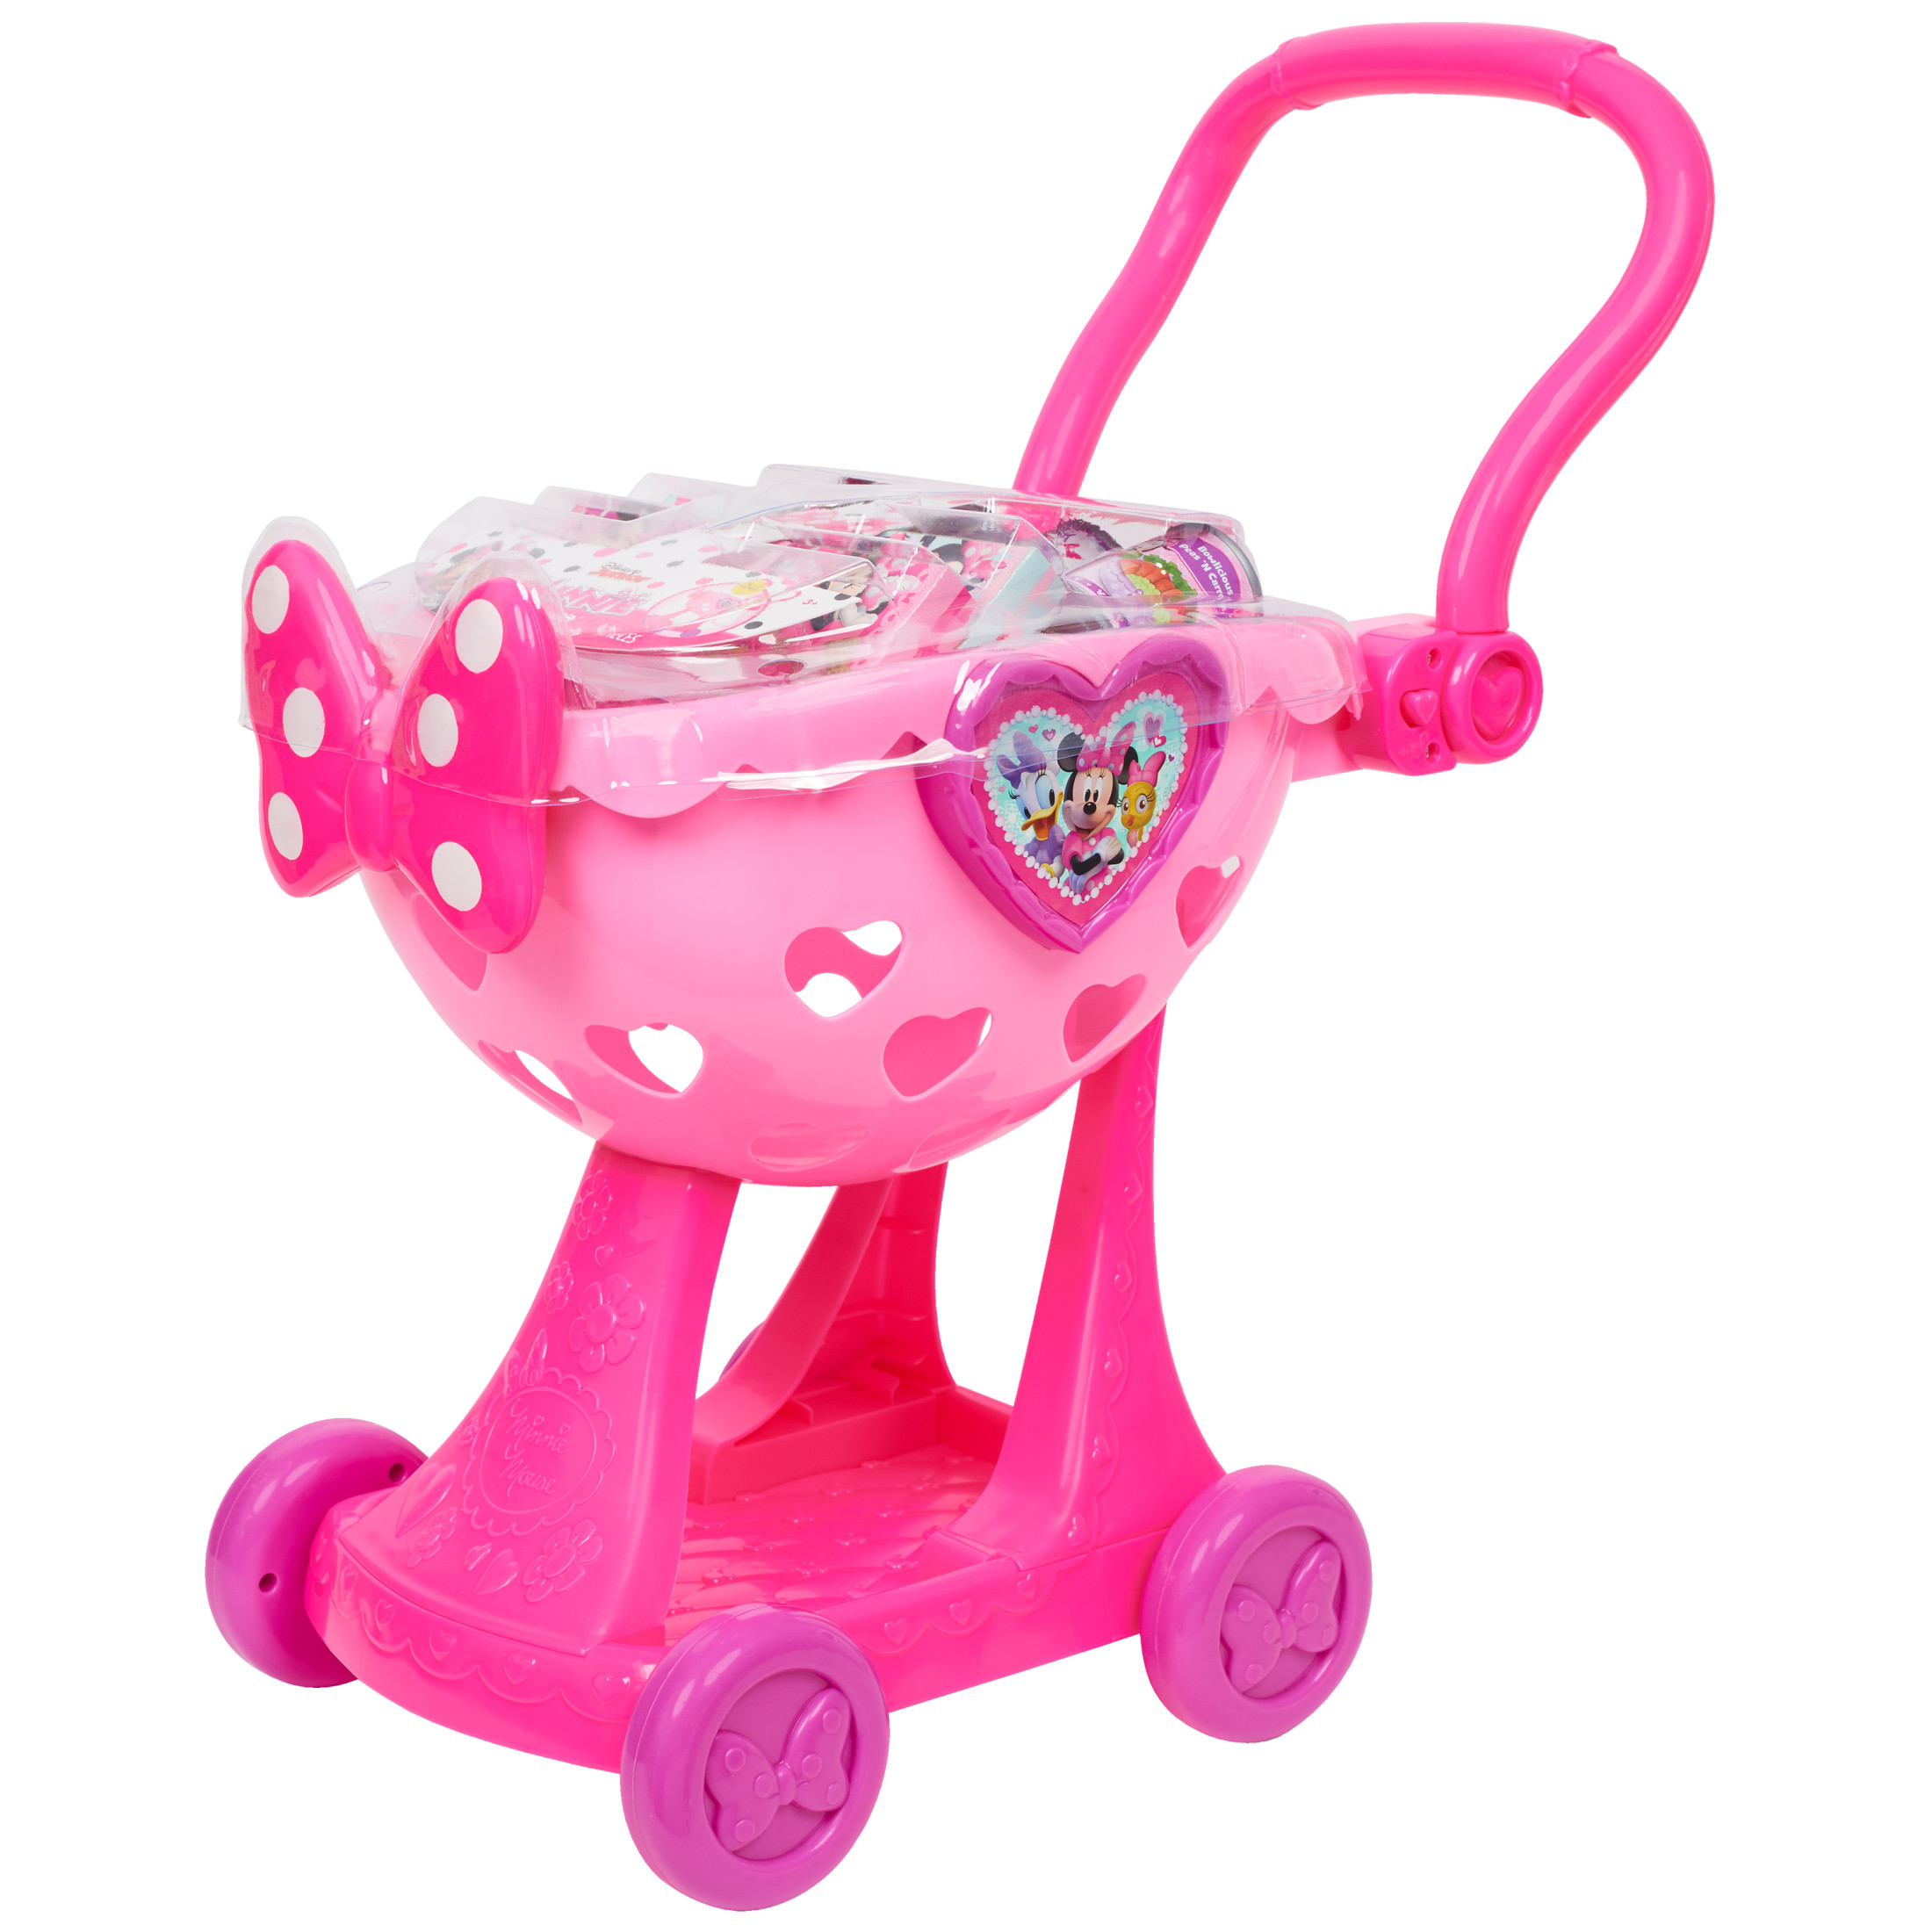 Disney Junior Minnie Mouse Bowtique Shopping Cart, Dress Up and Pretend Play, Kids Toys for Ages 3 up - image 1 of 9